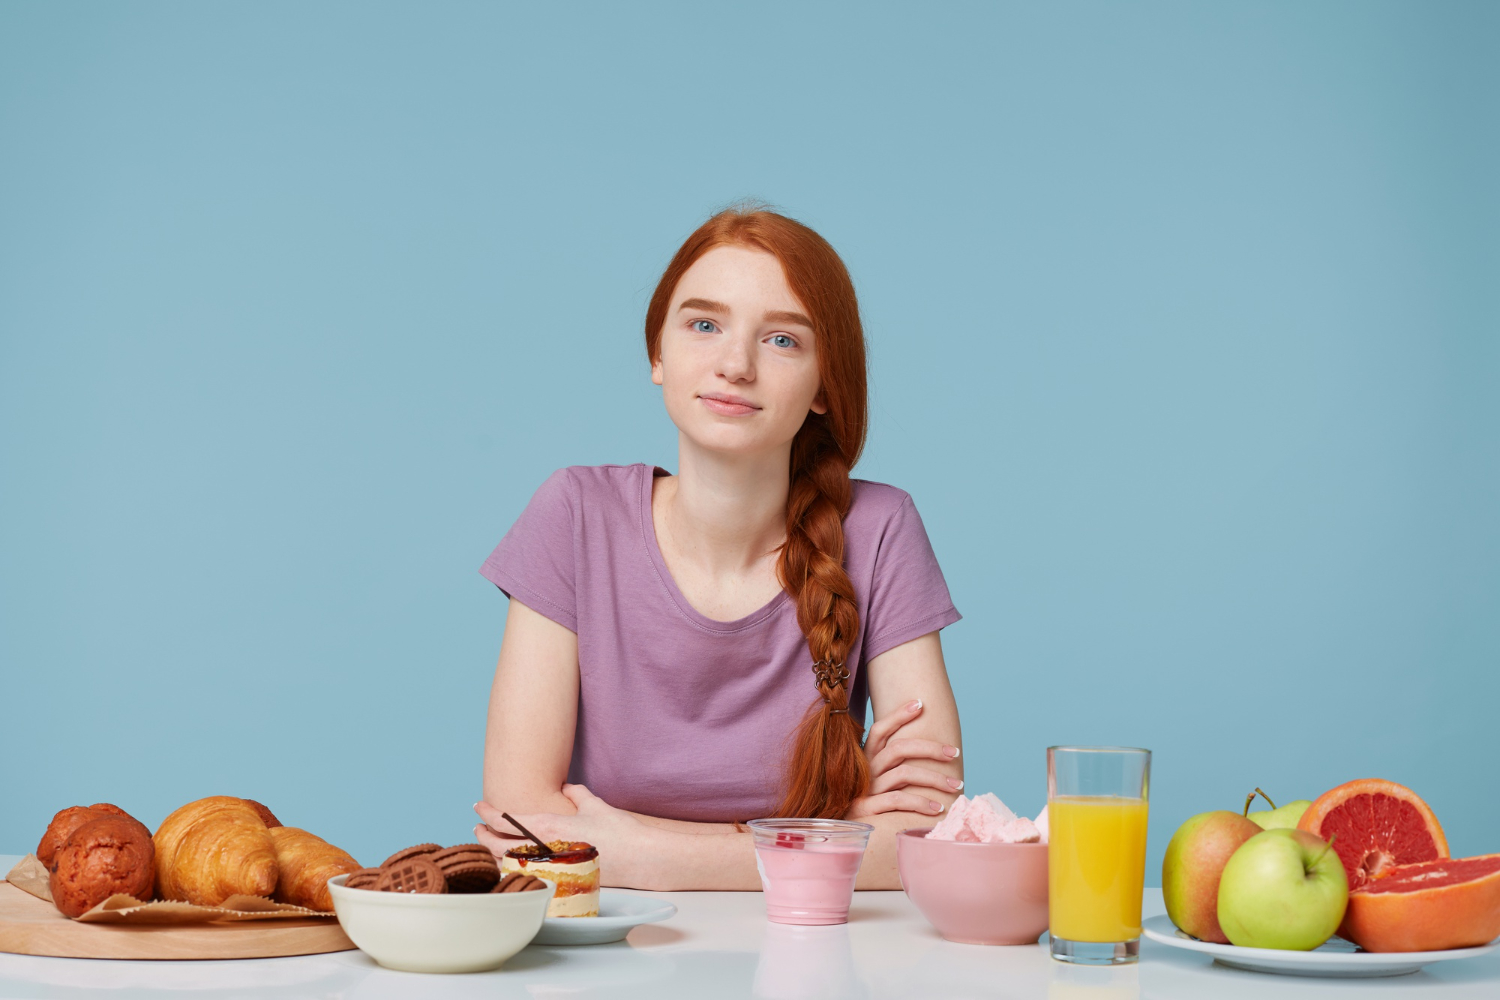 beautiful red haired girl with braided hair sitting table about eat breakfast kathryn